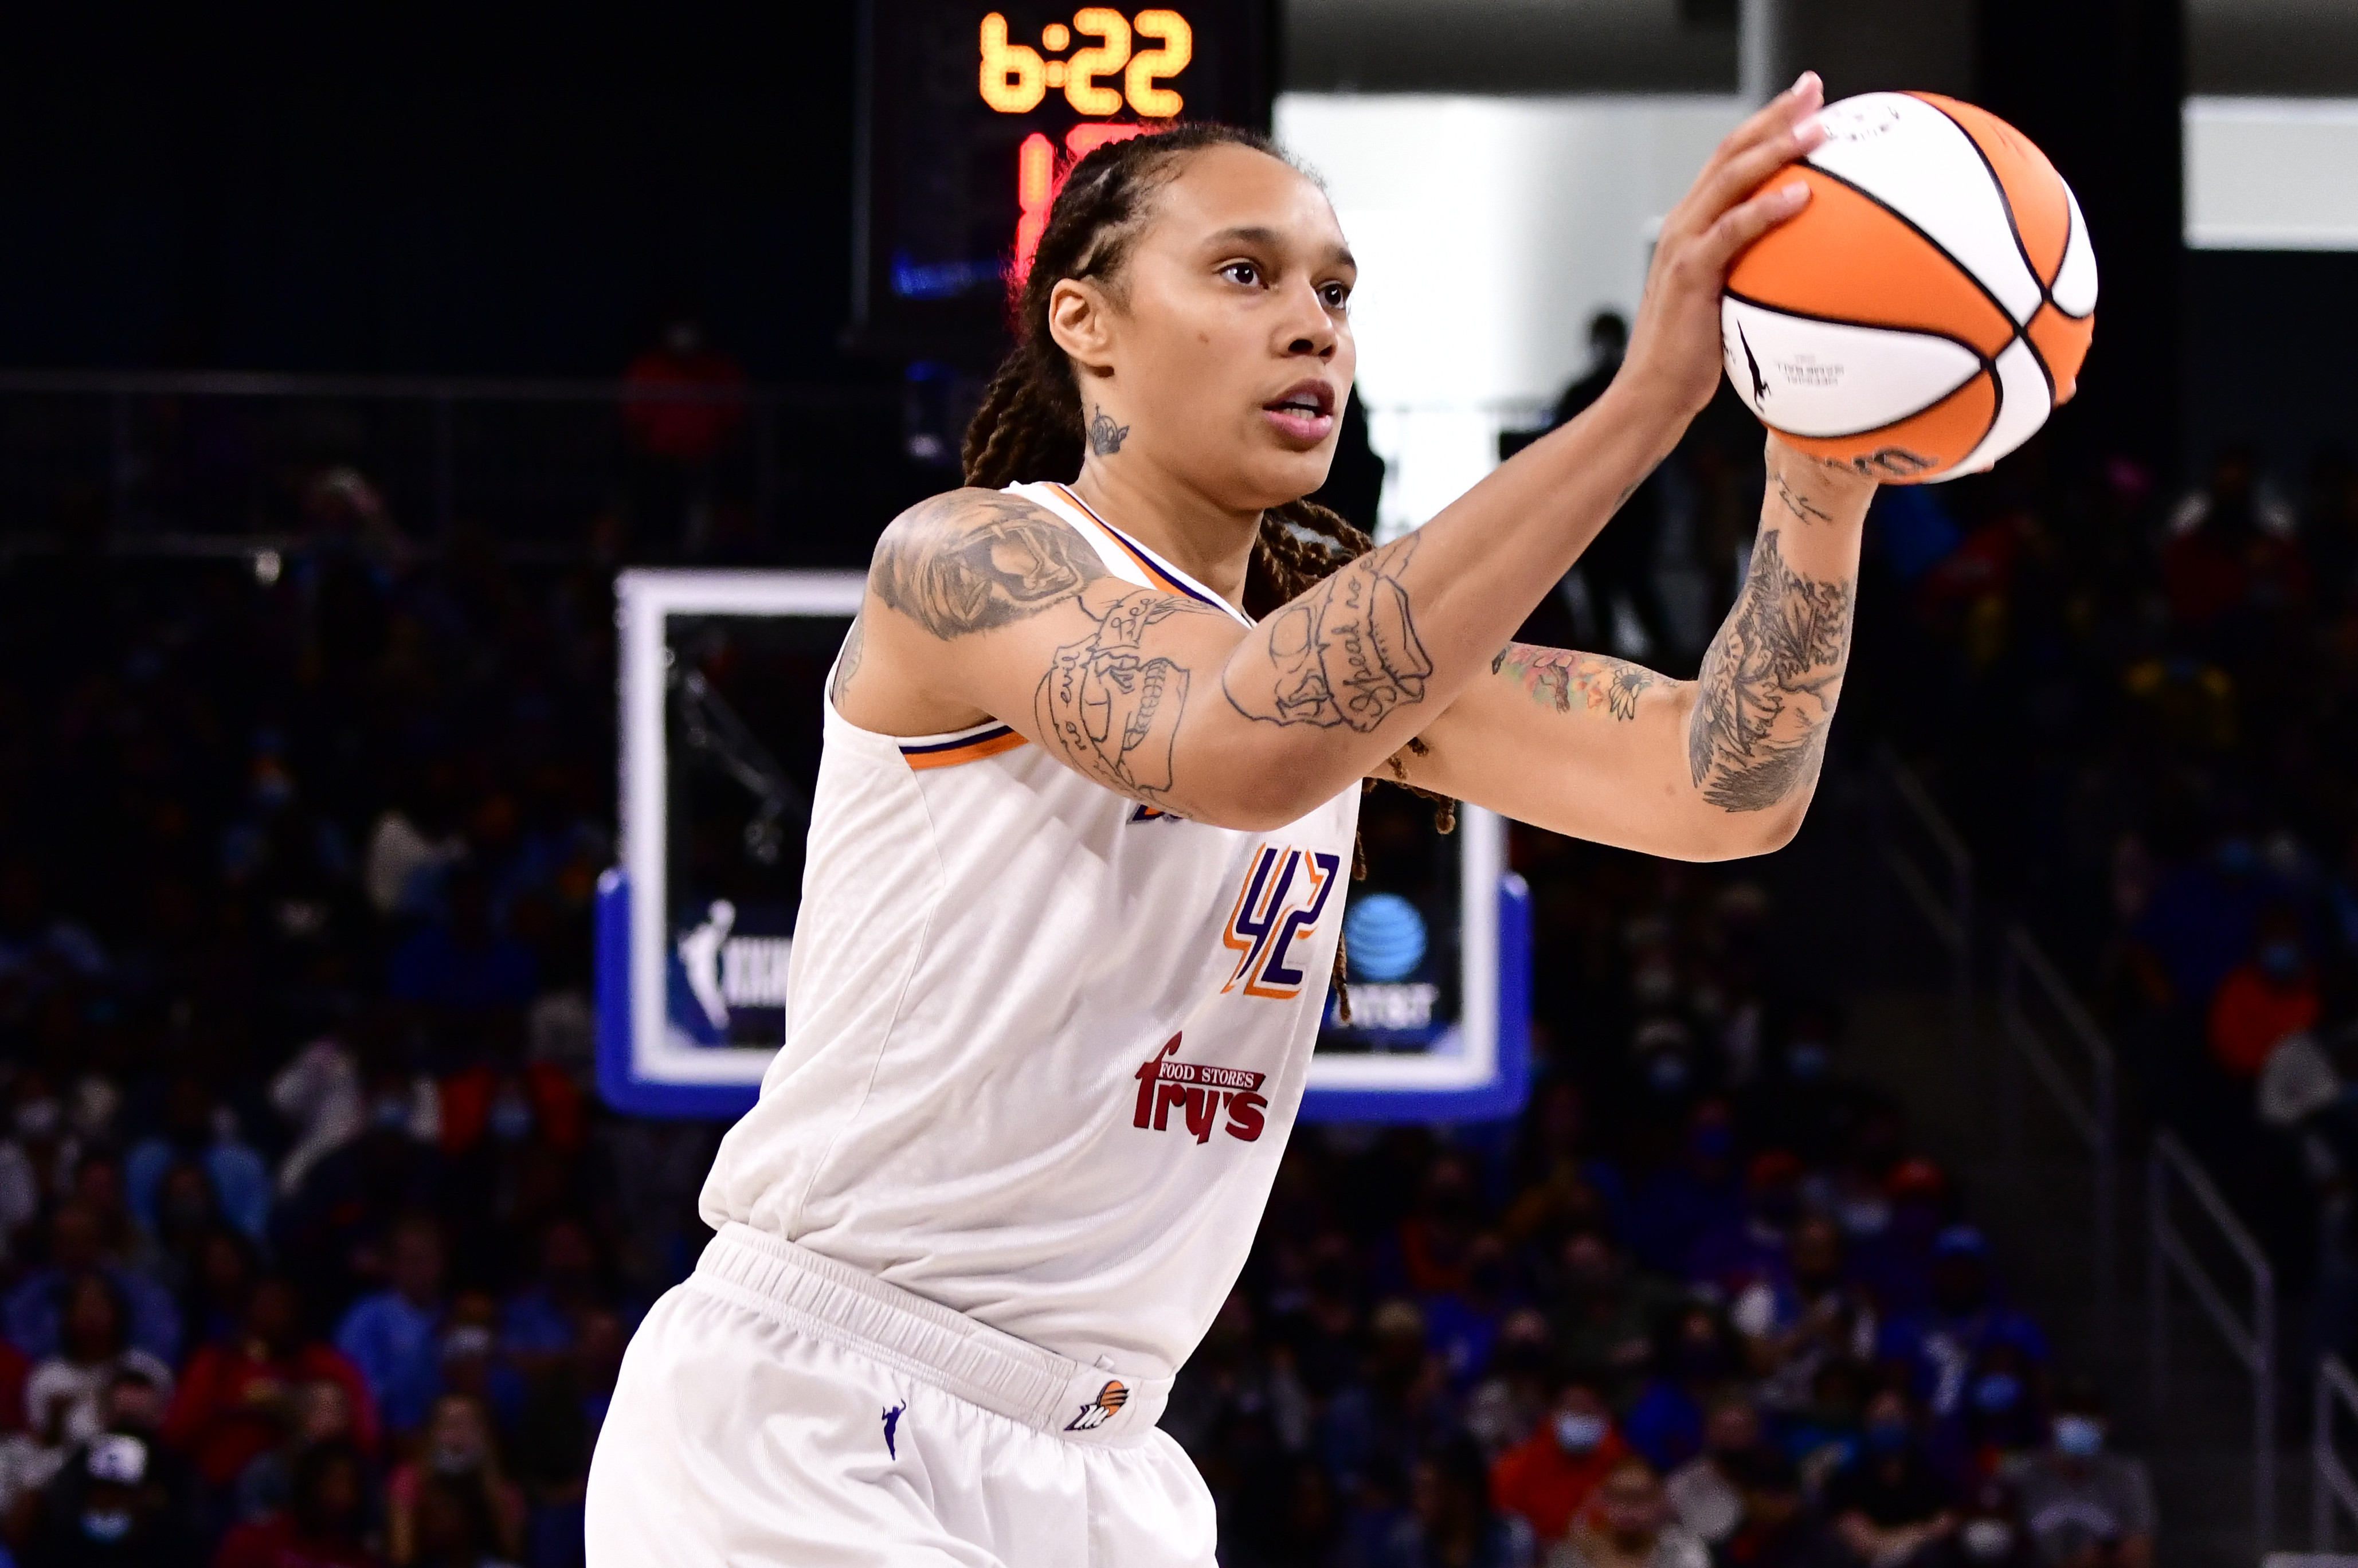 U.S. Secretary of State: Brittney Griner Will Be Provided 'Every Possible Assist..